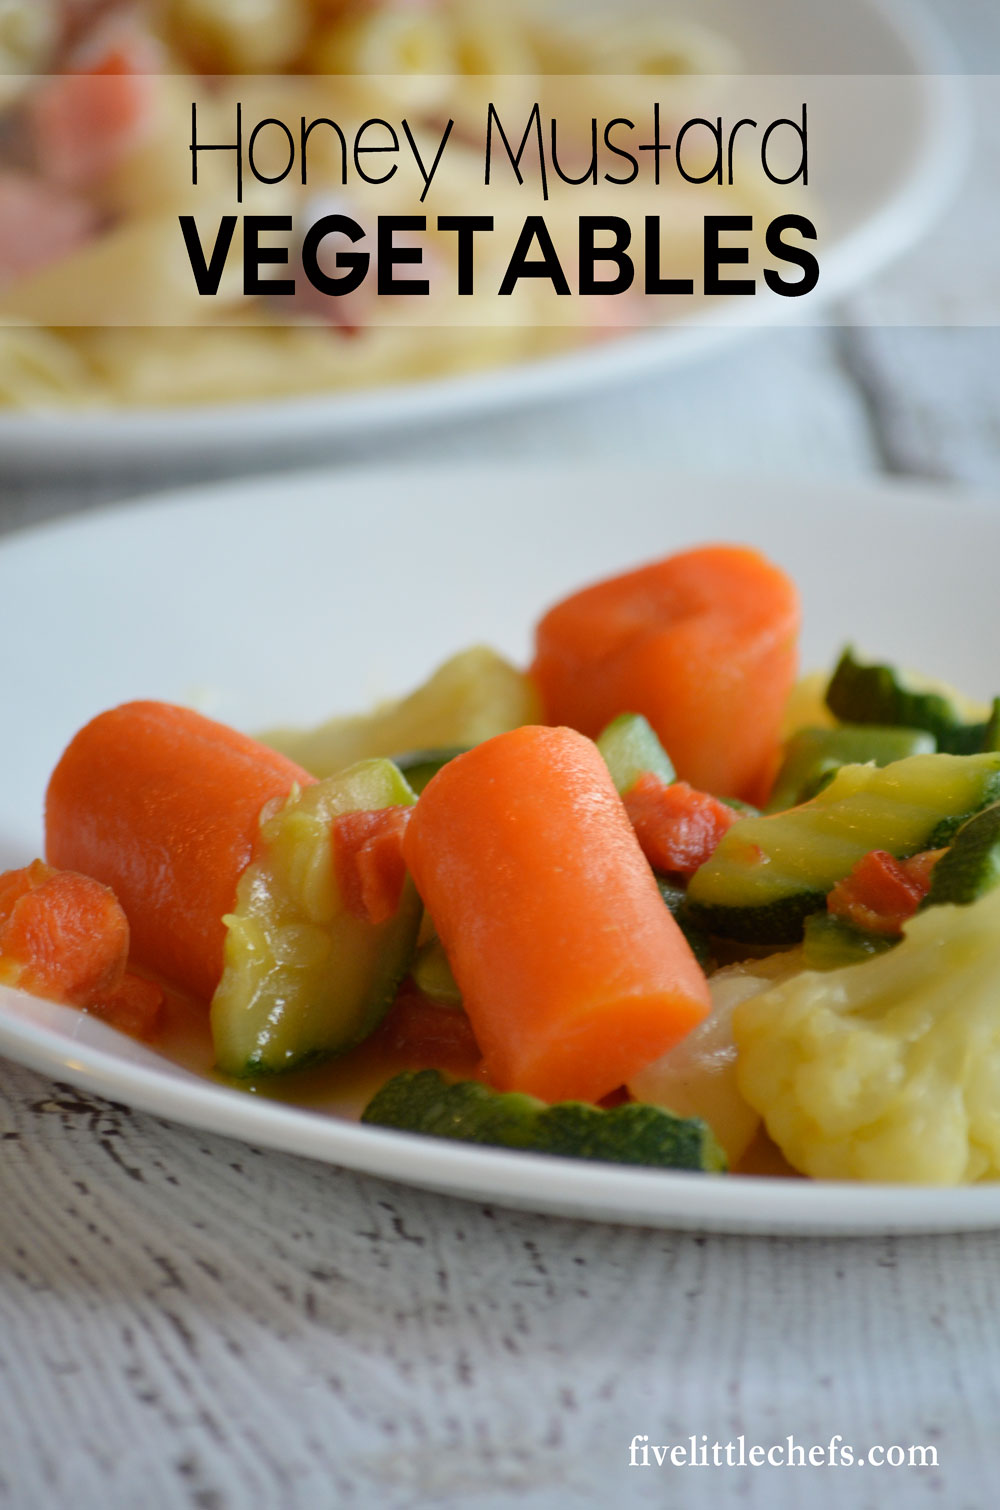 This honey mustard veggies recipe is quick to put together. It is a great last minute side dish because it uses common ingredients found in your pantry.